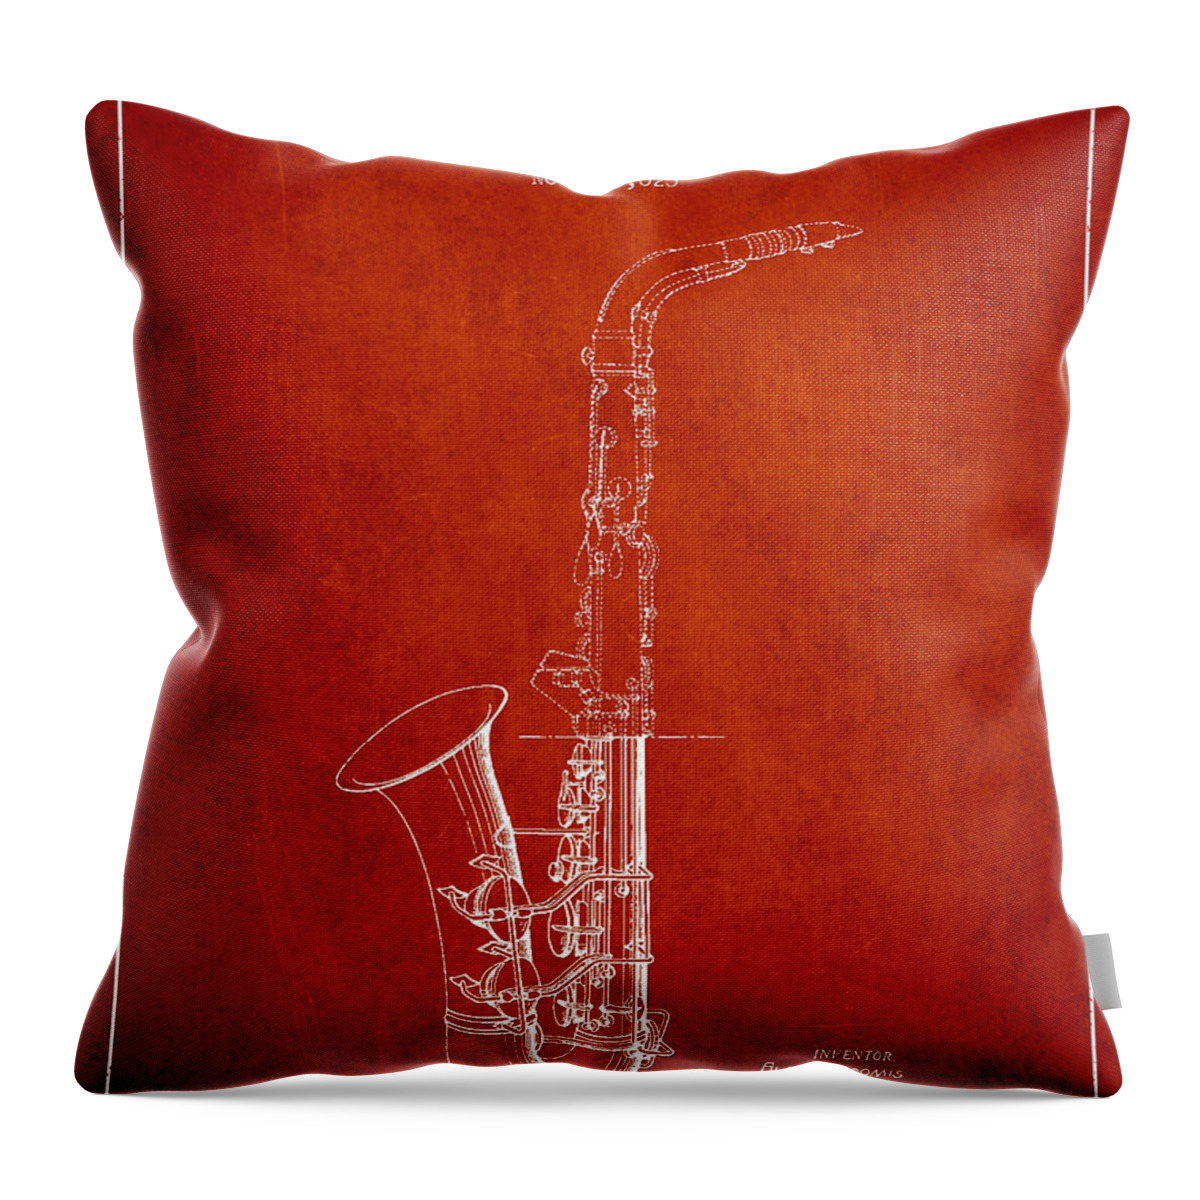 Saxophone Throw Pillow featuring the digital art Saxophone Patent Drawing From 1937 - Red by Aged Pixel